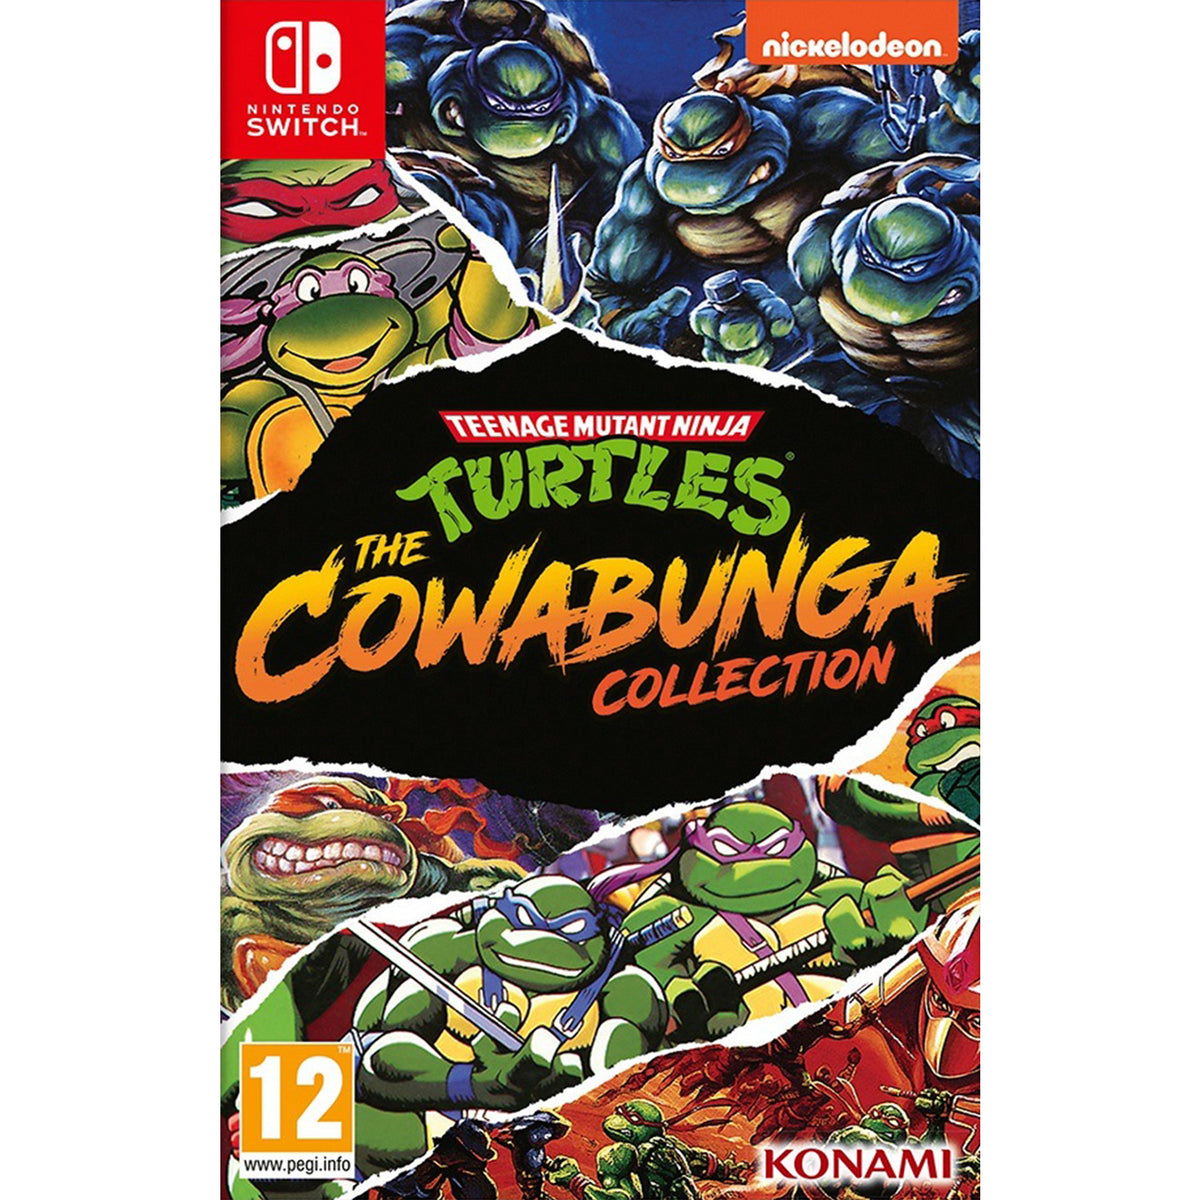 The Switch The Cowabunga Turtles: – Collection Teenage Mutant Of Deal Ninja Day! Go\'s Entertainment -